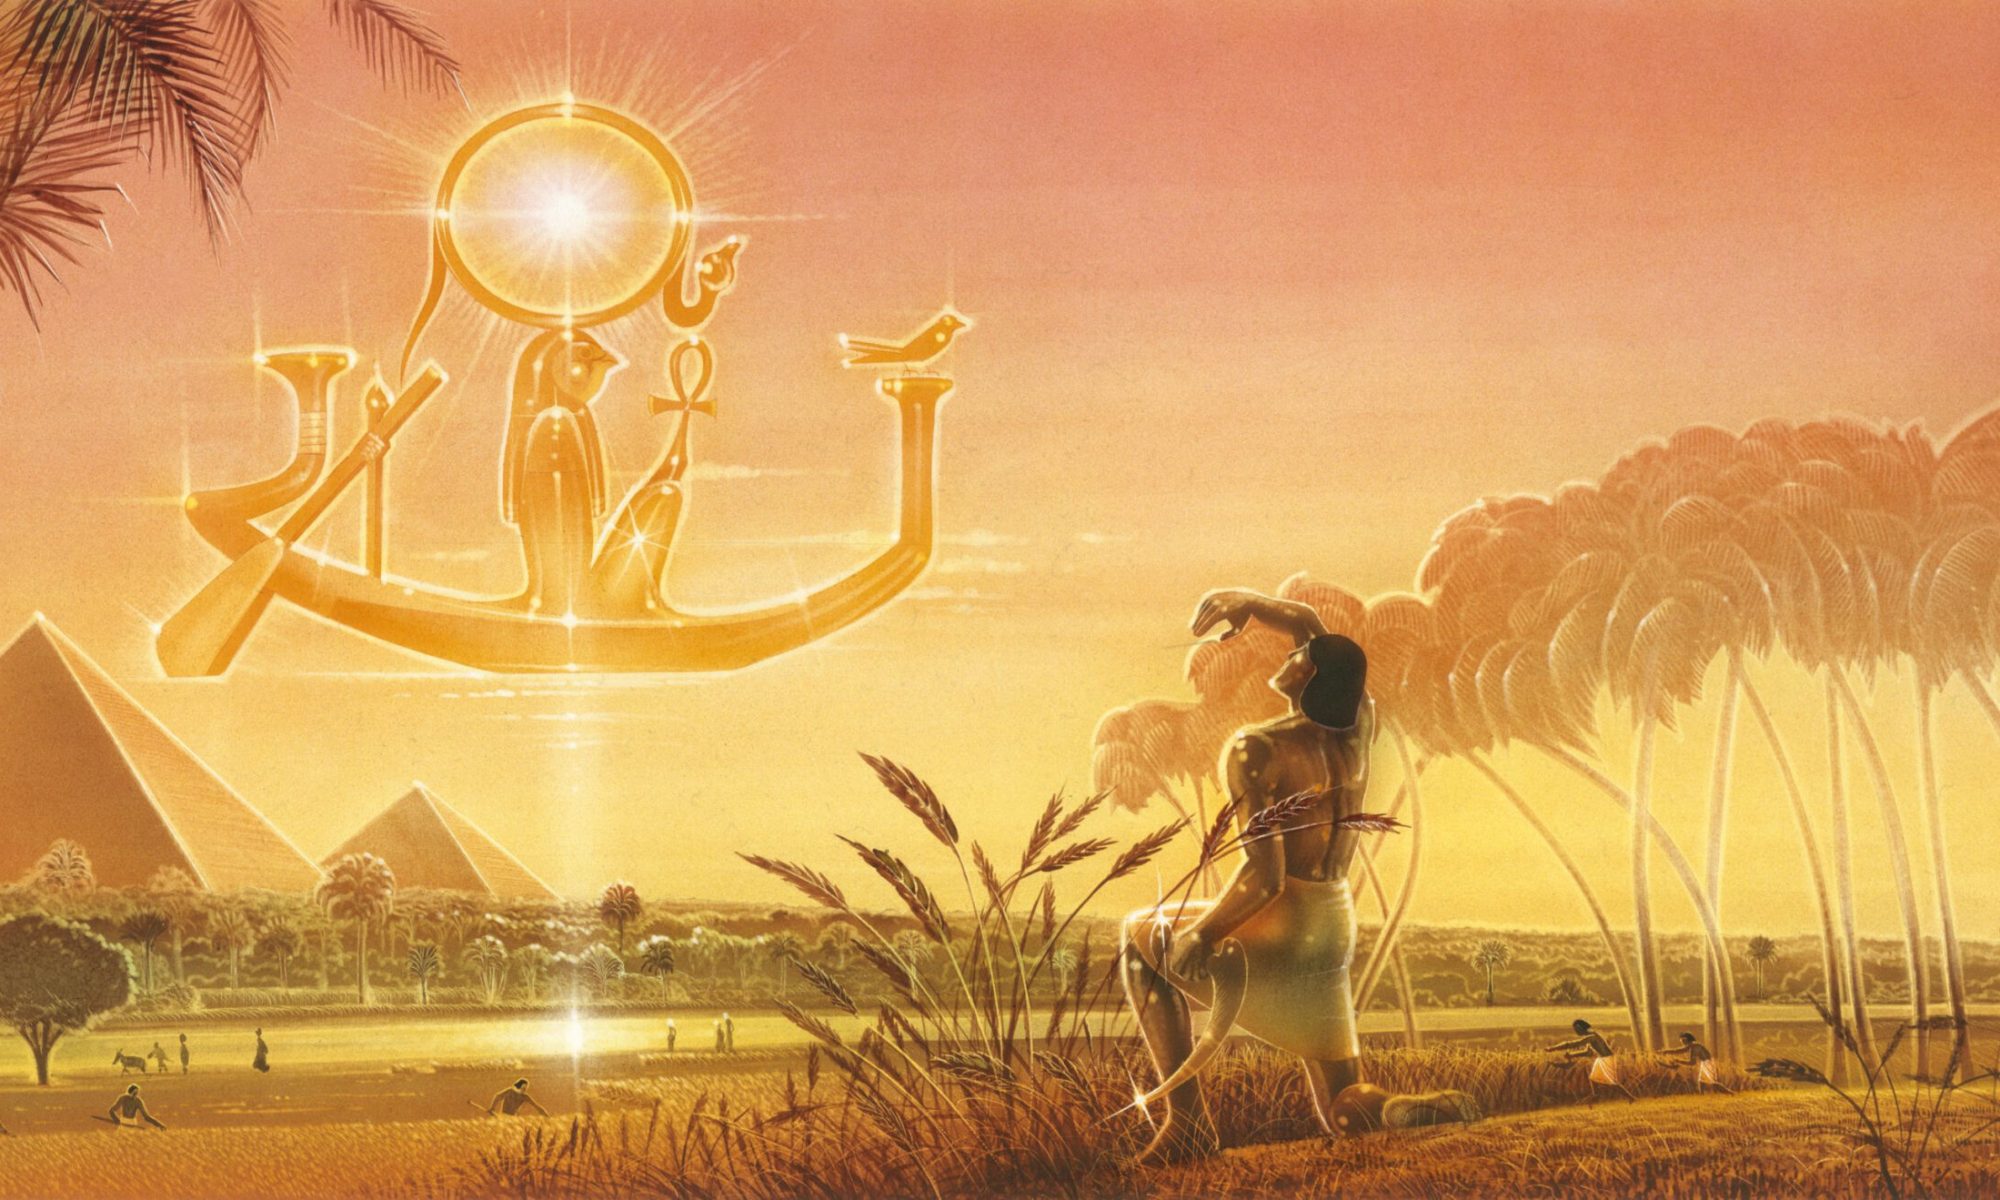 Illustration of Egyptian sun god Ra from national Geographic